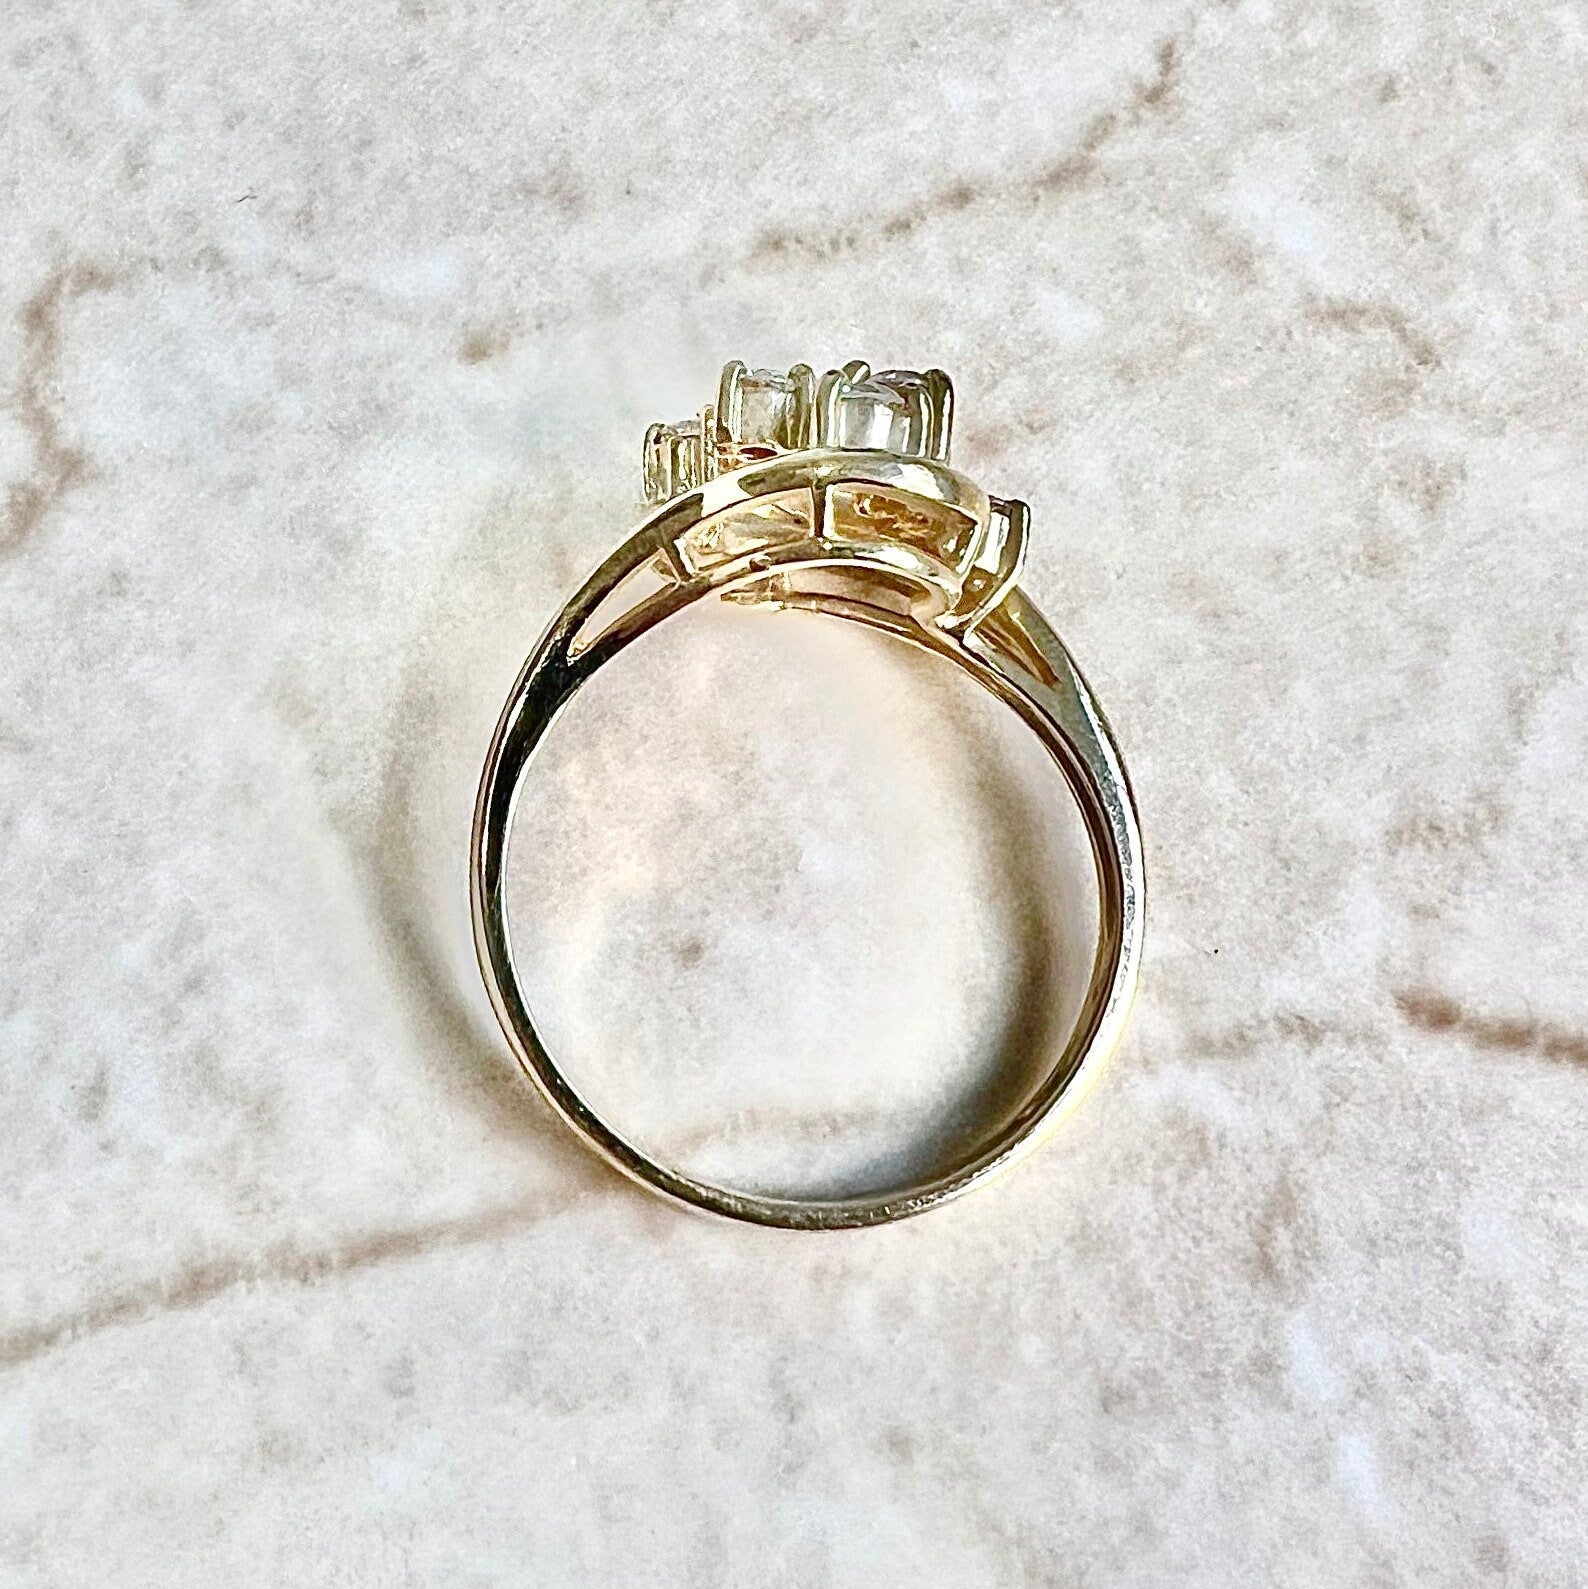 Vintage 14K Diamond Cluster Ring - 14K Yellow Gold Diamond Cocktail Ring - Bypass Ring - Promise Ring - Birthday Gift - Best Gifts For Her